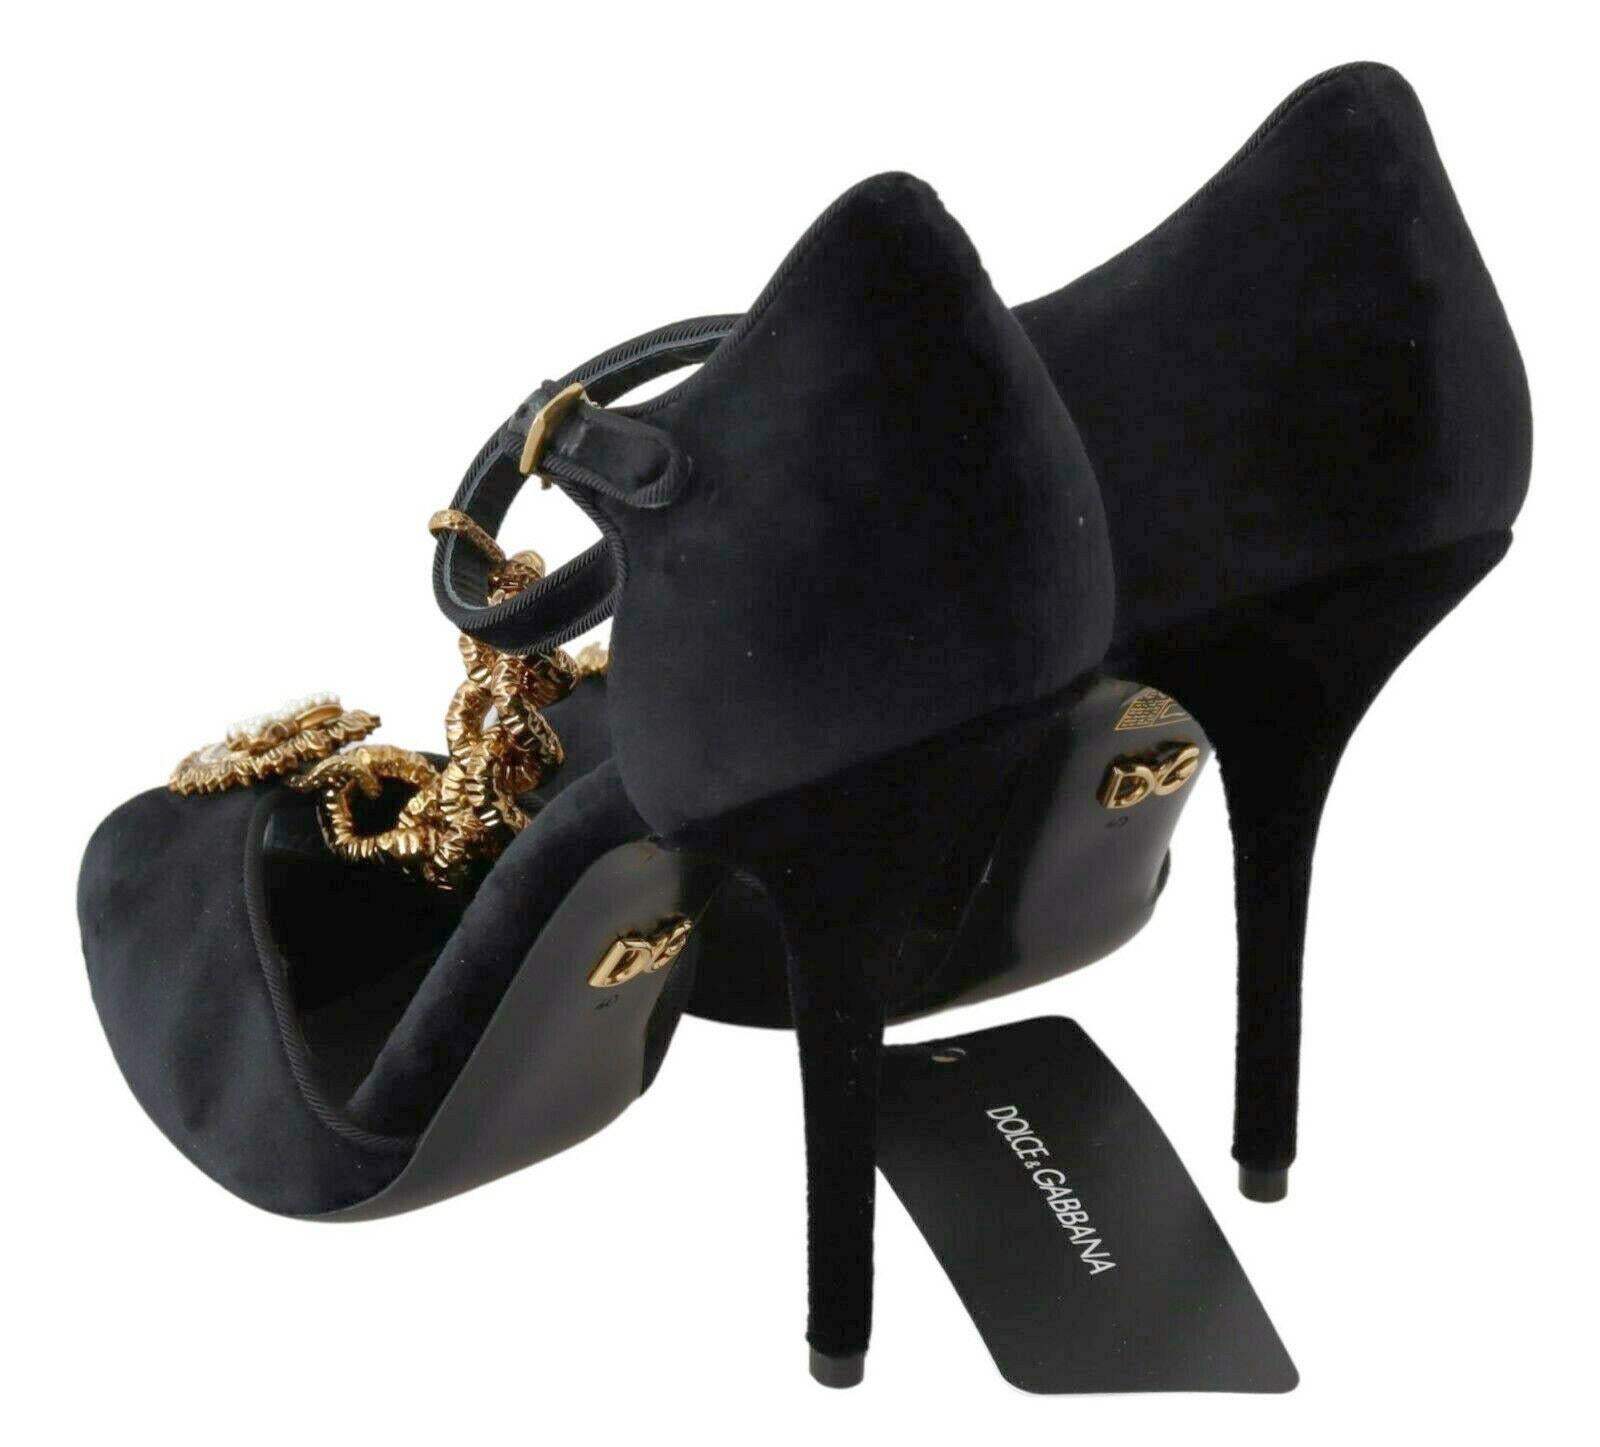 Dolce & Gabbana Black Gold Mary Jane Shoes Heels Pumps With DG Logo Heart Pearls 2